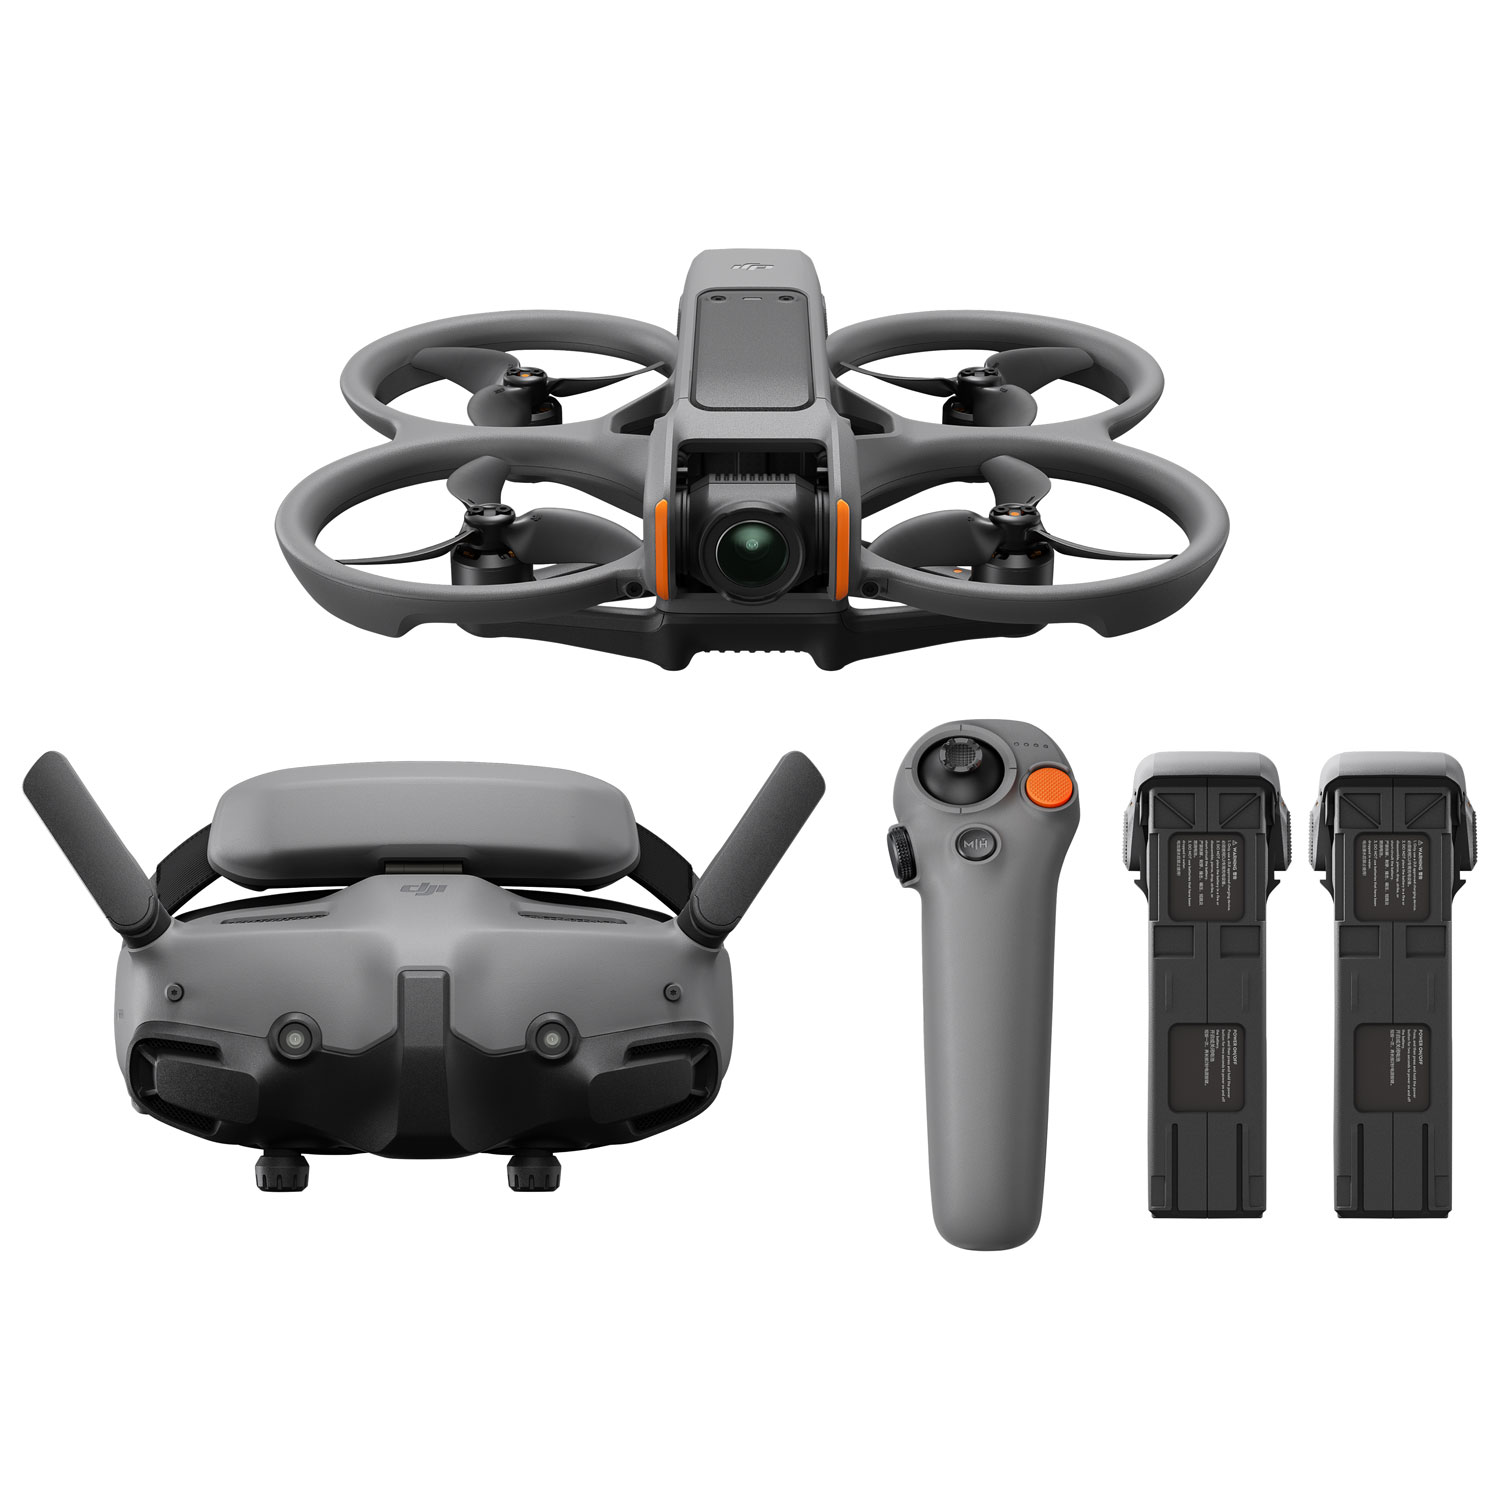 DJI Avata 2 Quadcopter Drone Fly More Combo with 2 Extra Batteries, Goggles, Controller & Sling Bag